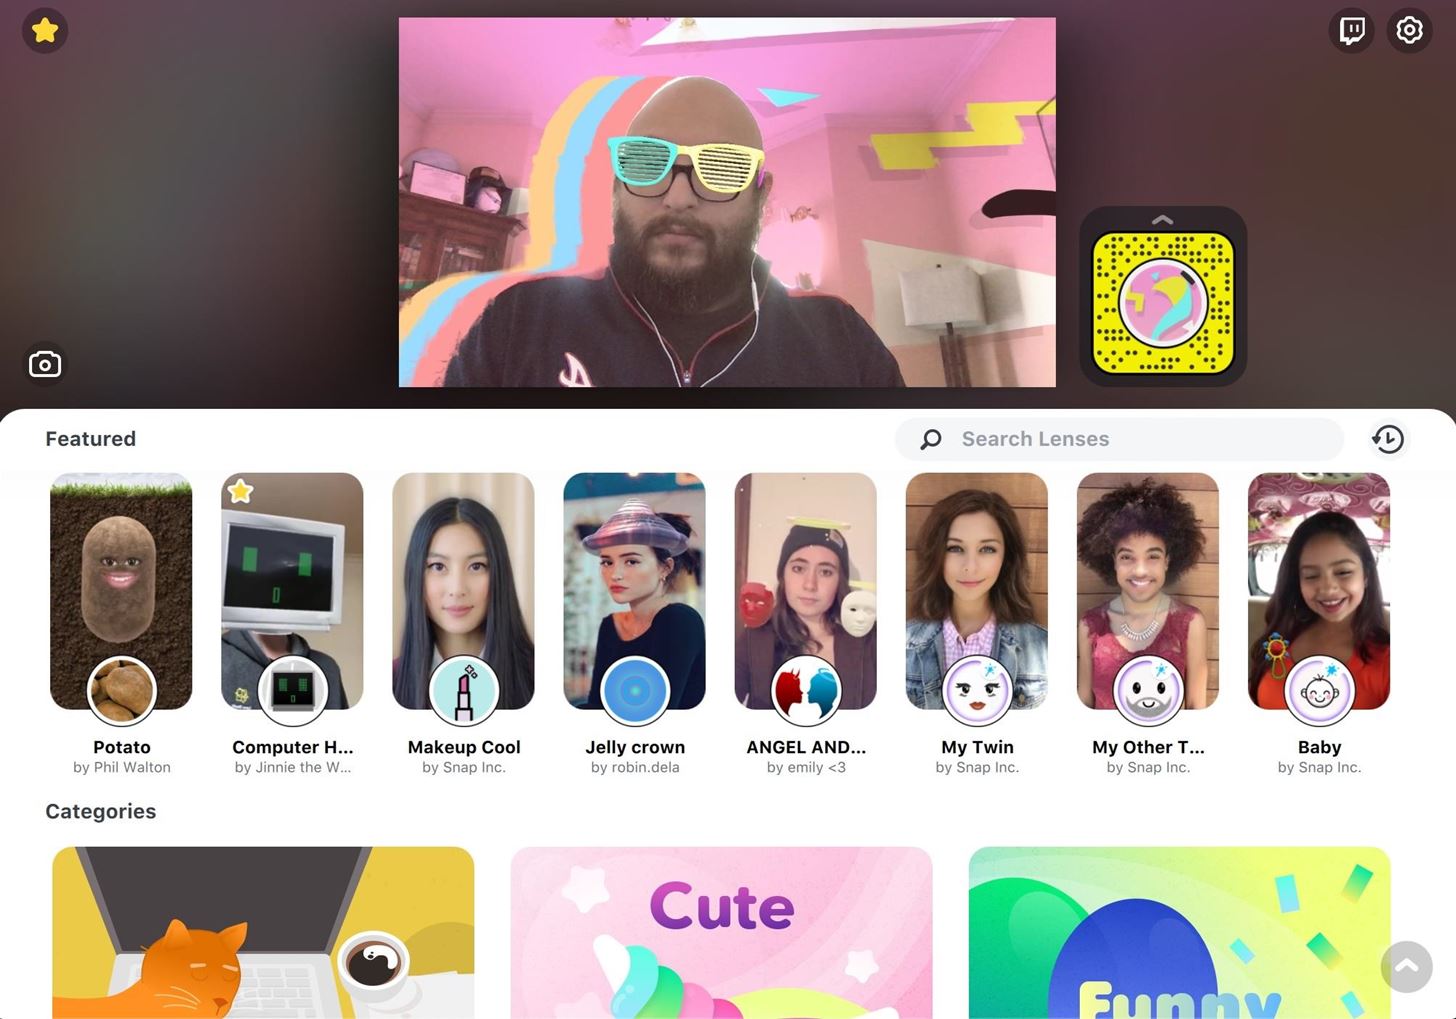 How to Use Your Favorite Snapchat AR Lenses on Zoom, Skype, Meet & Other Video Conferencing Apps